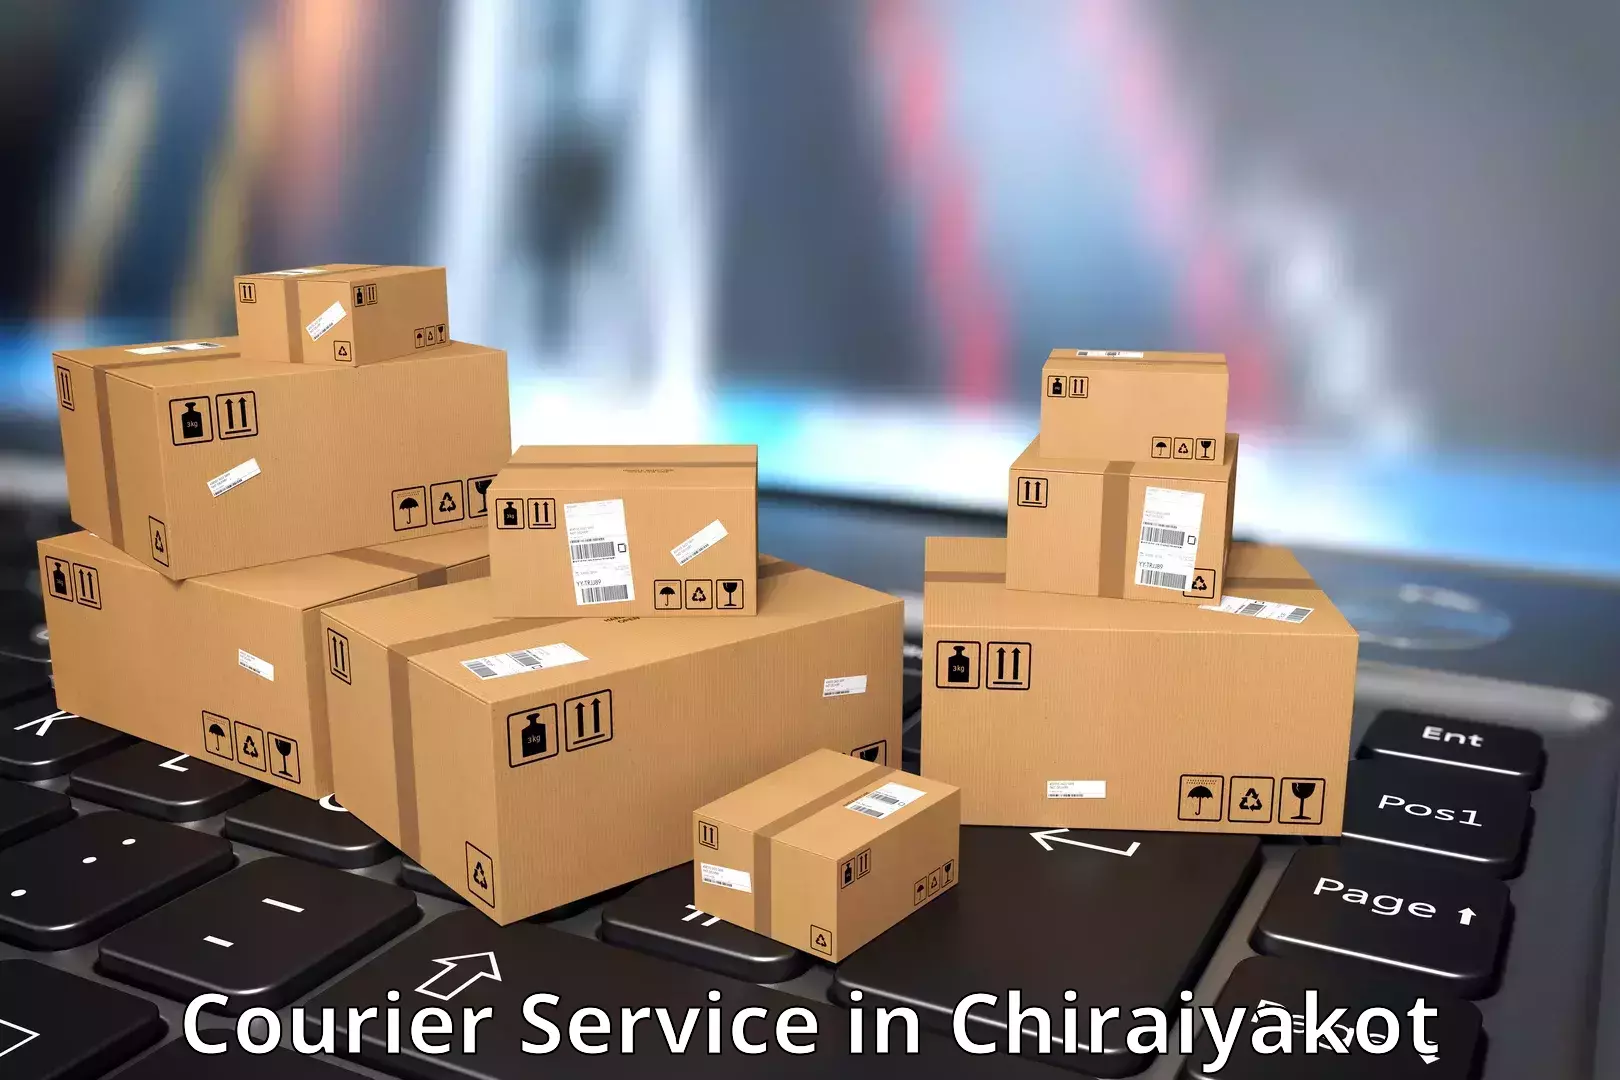 Round-the-clock parcel delivery in Chiraiyakot